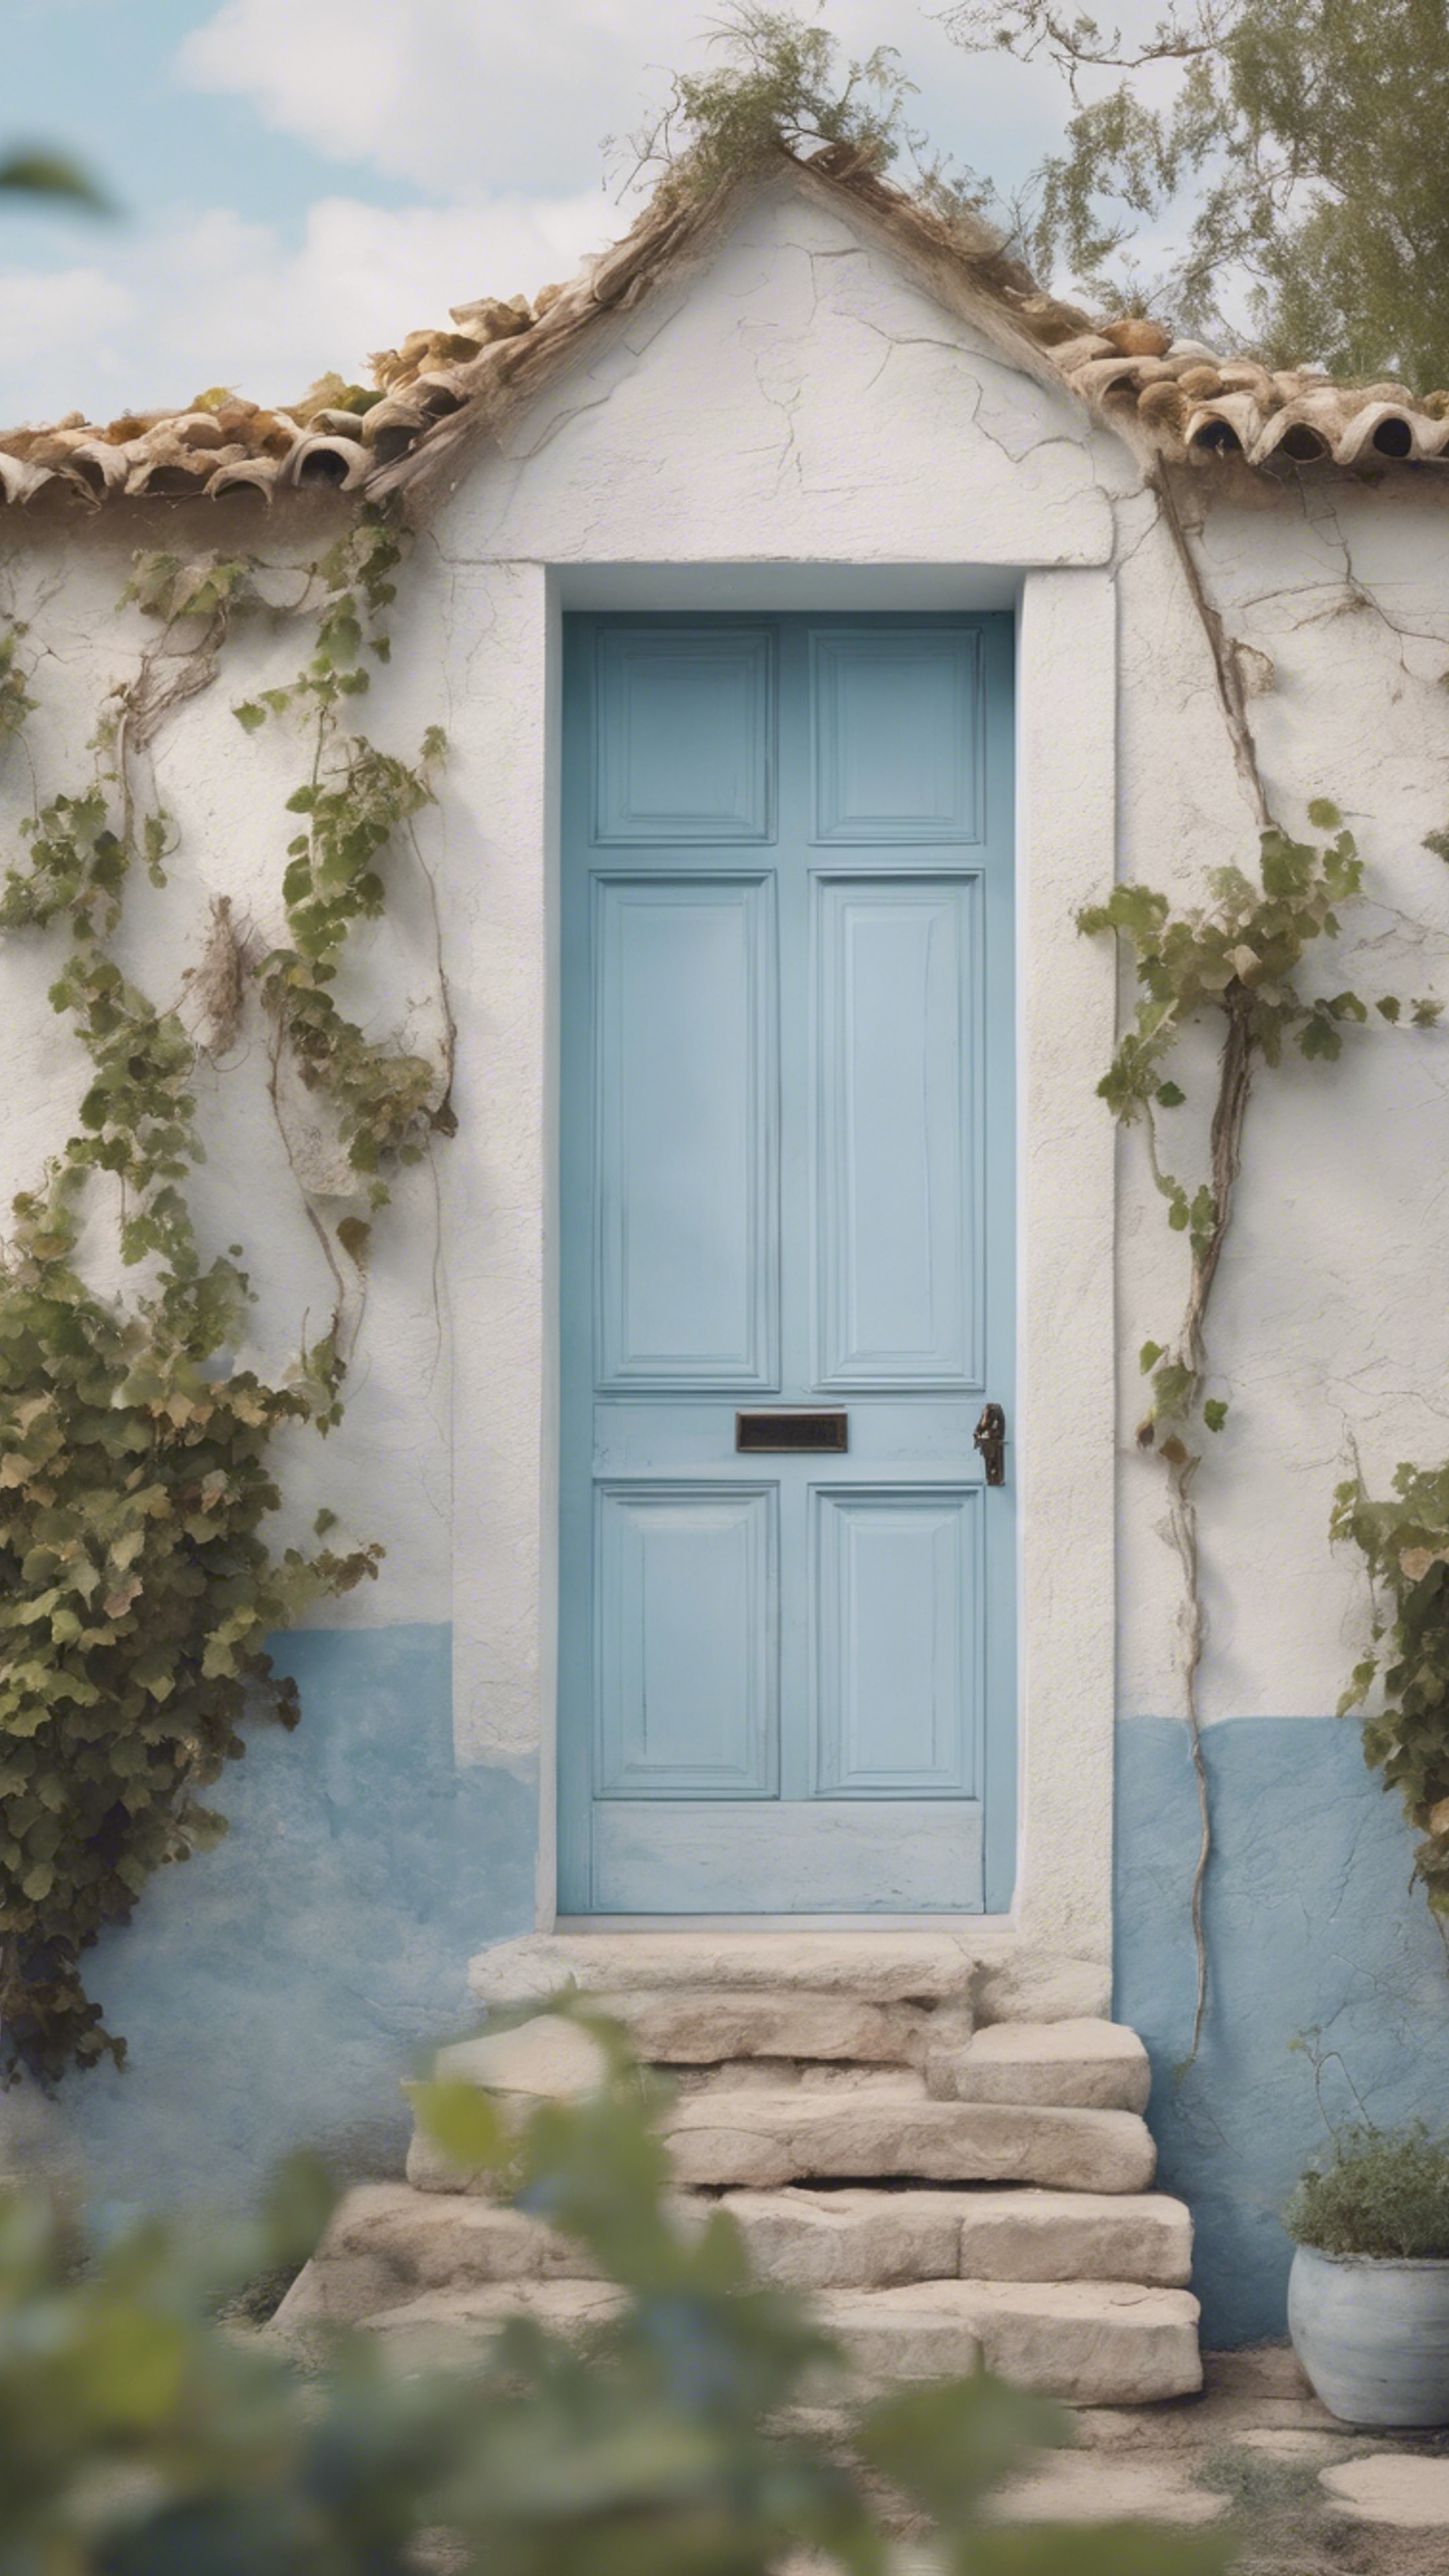 A pastel blue painted door on a rustic white house, a vineyard in the background. Fondo de pantalla[5cba61123f91494ab86f]